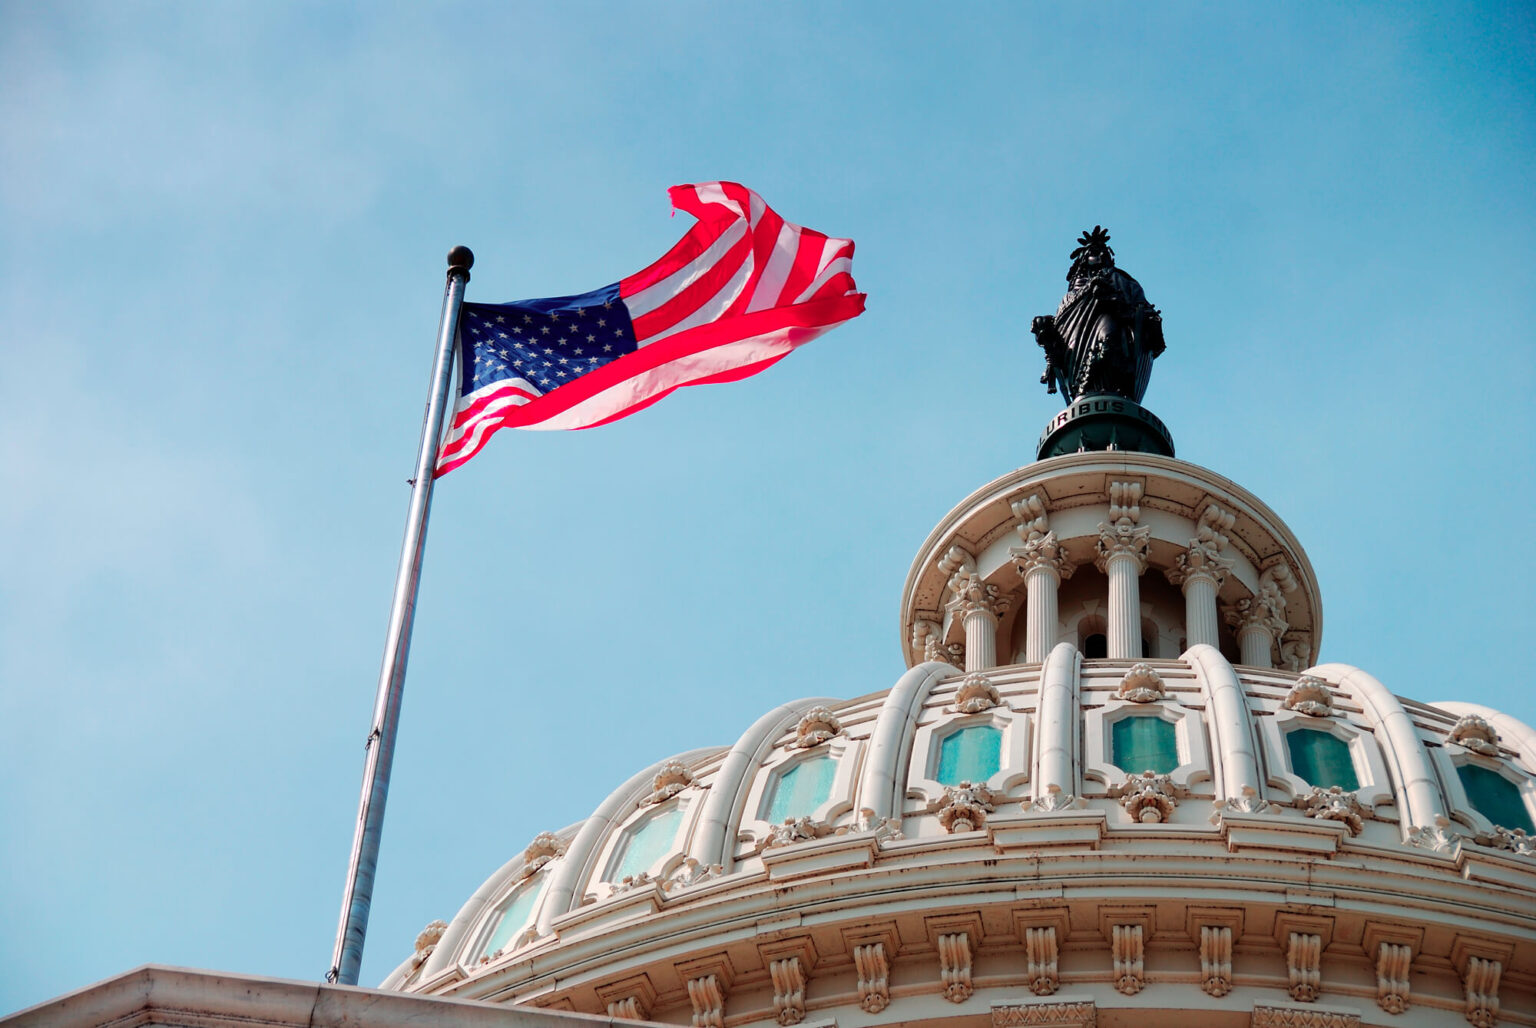 Senate Committee calls for crypto oversight by the CFTC